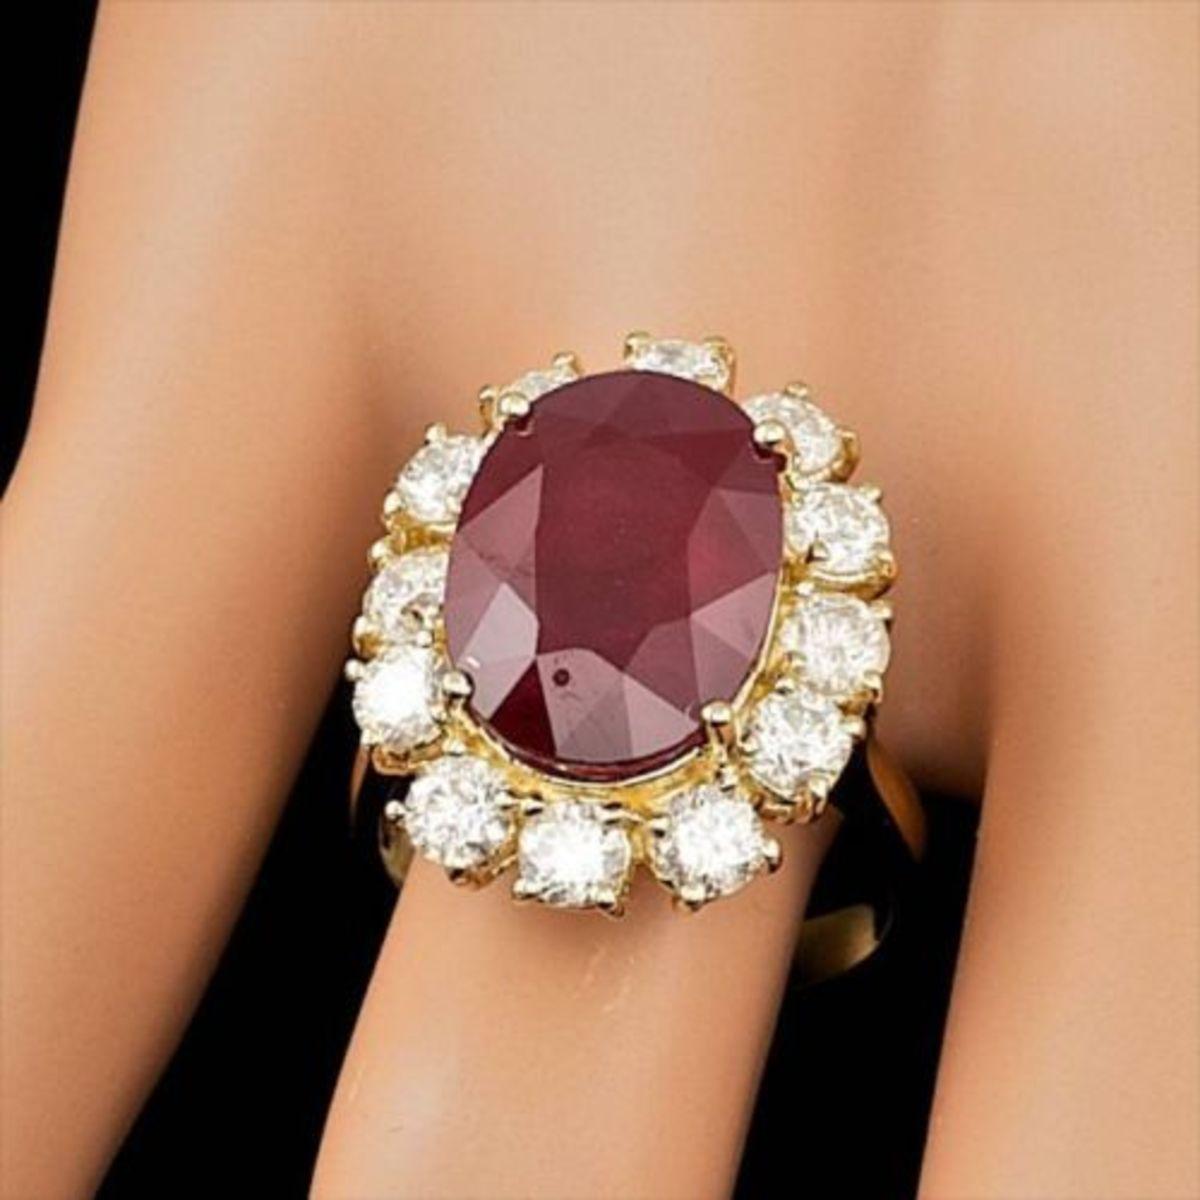 14K Yellow Gold 11.84ct Ruby and 2.42ct Diamond Ring